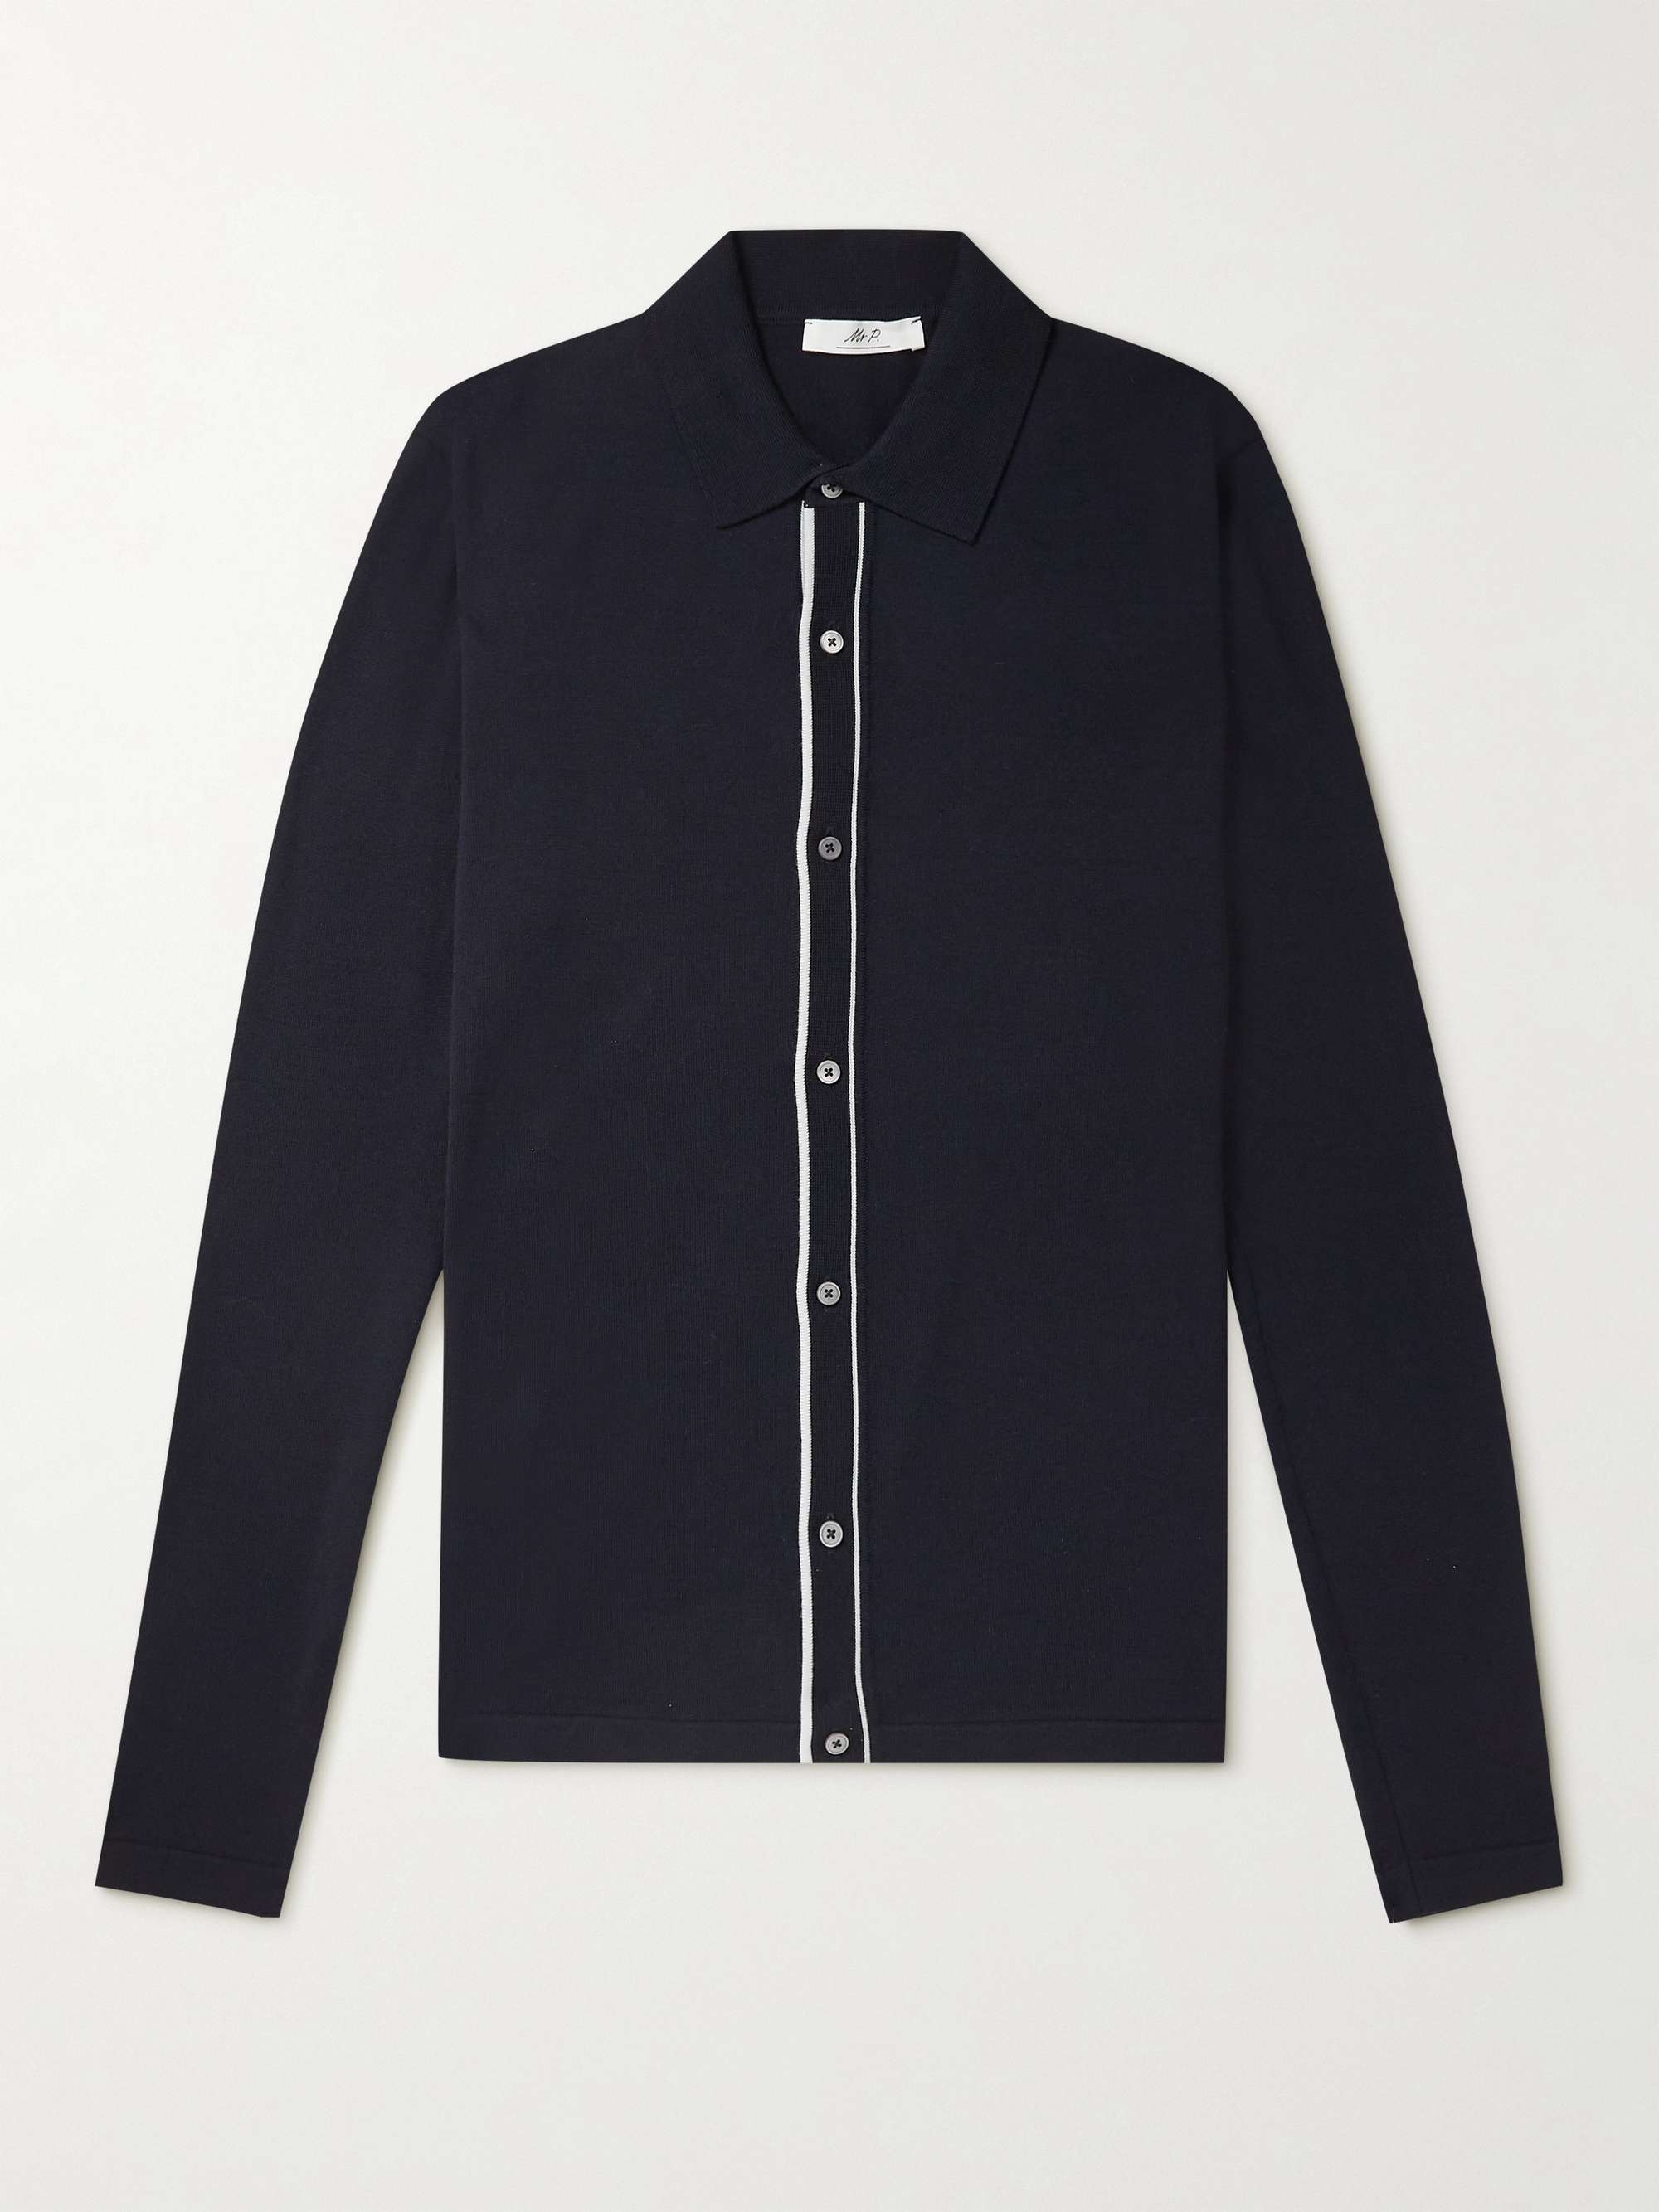 MR P. Contrast-Tipped Wool Shirt